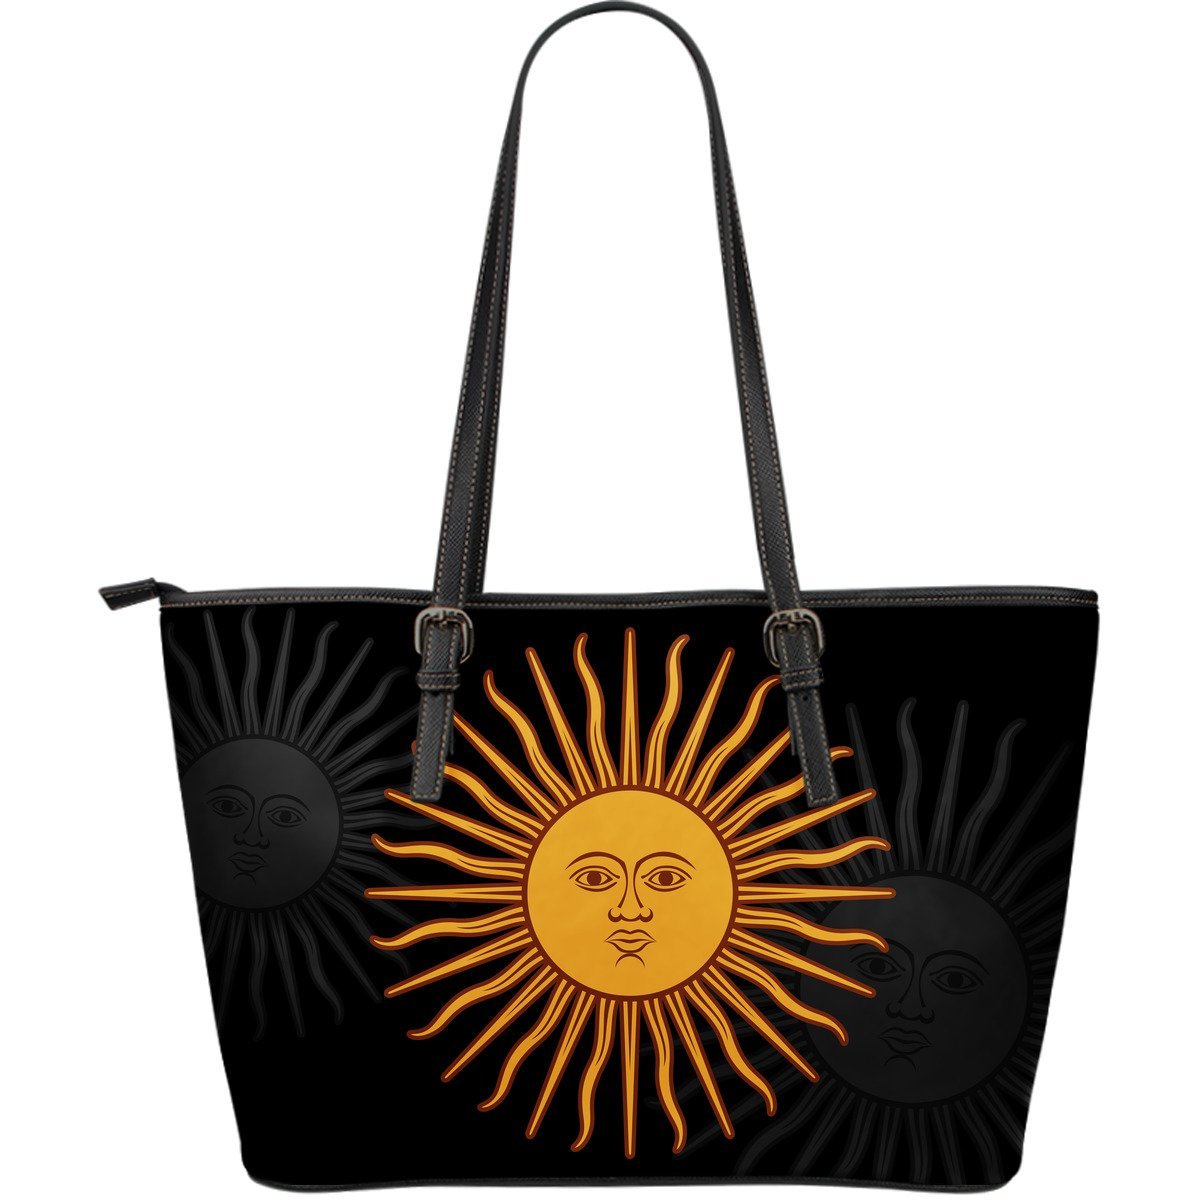 argentina-leather-tote-bag-large-size